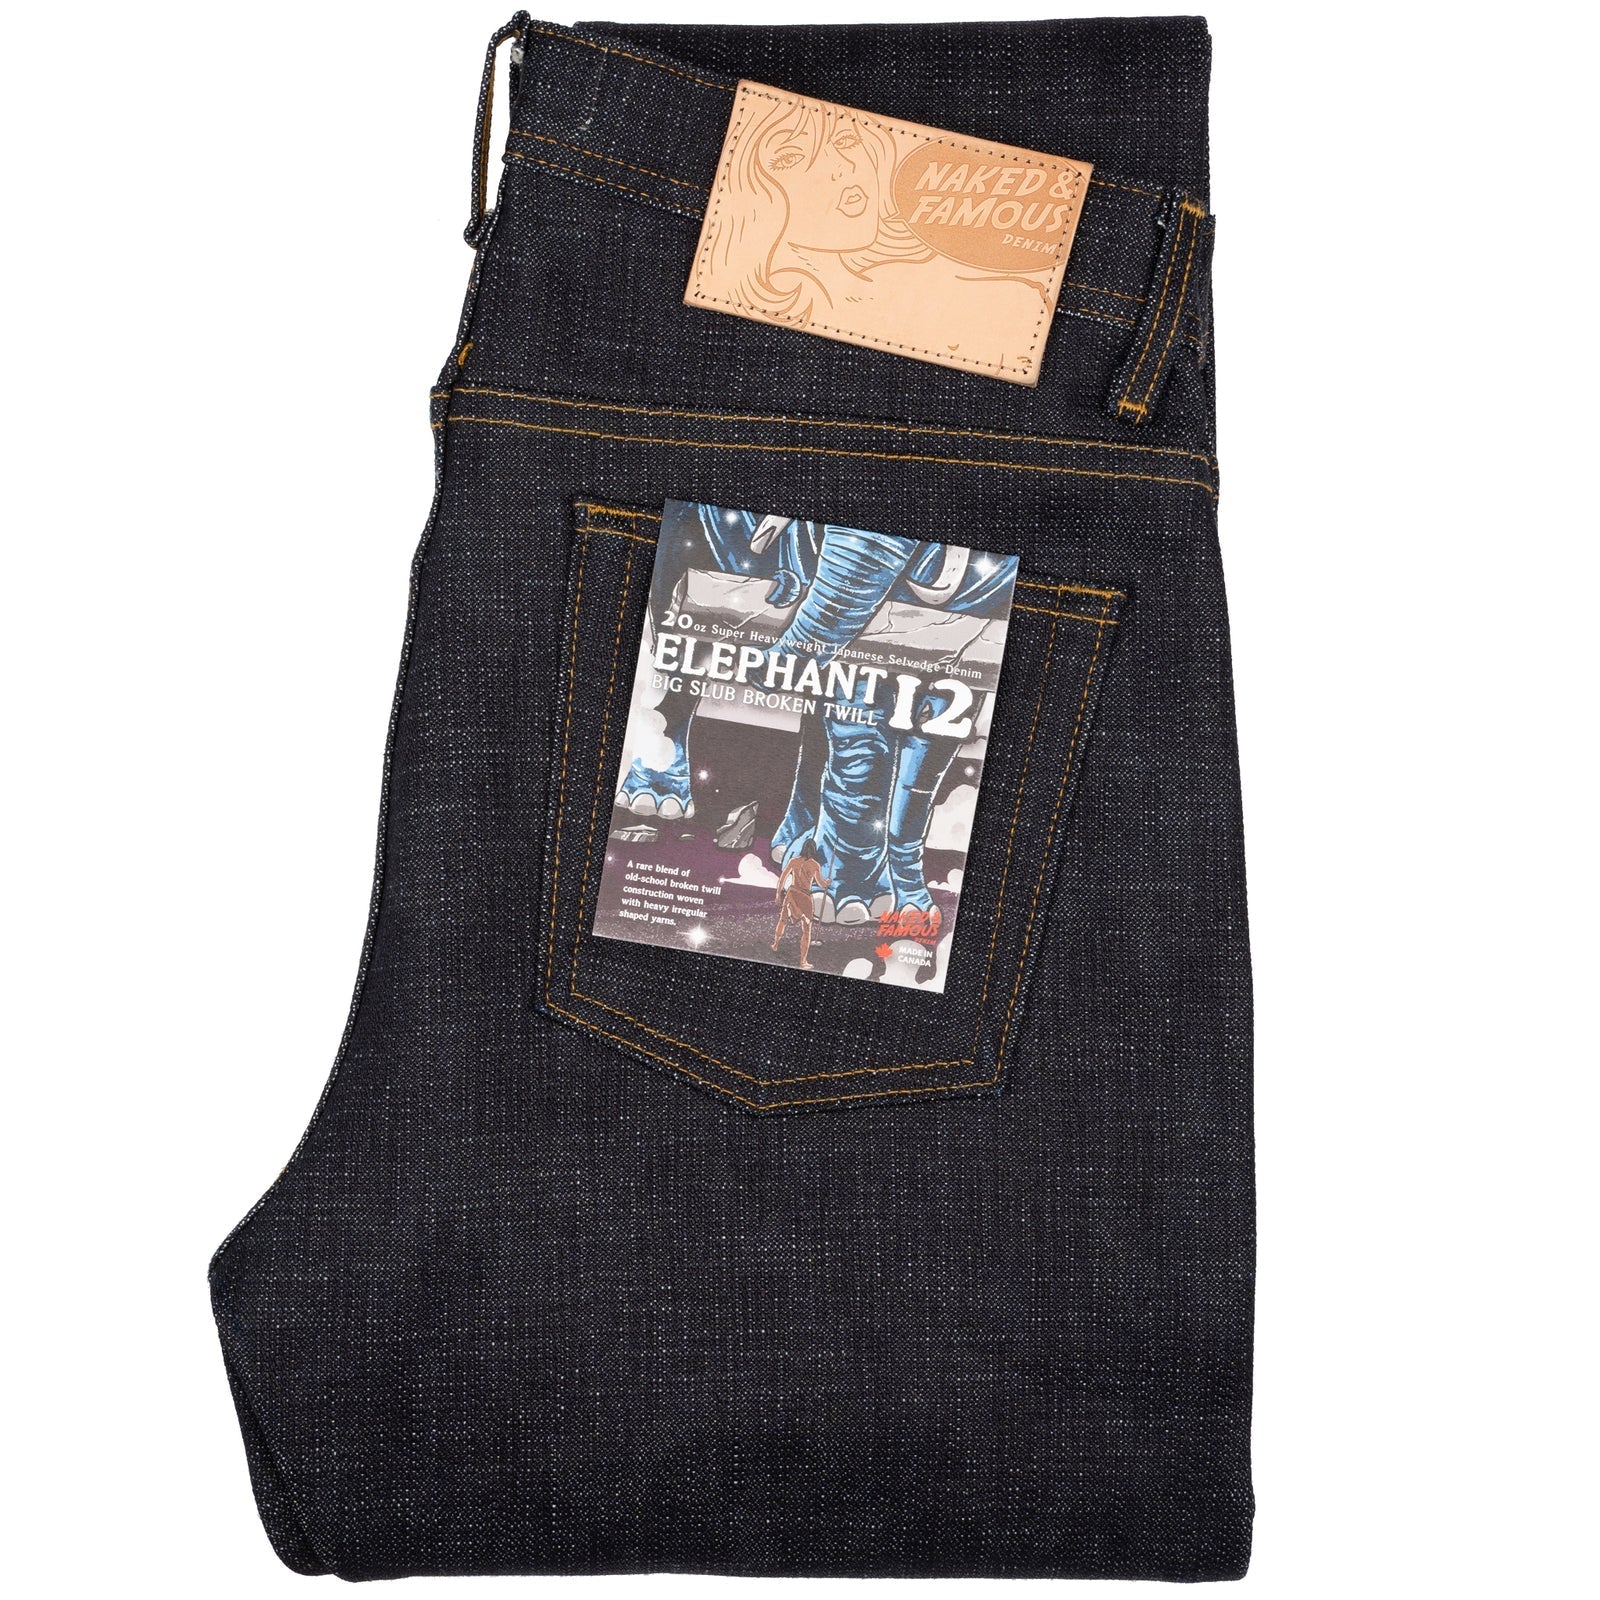 Tommy's Closet - Naked & Famous - Weird Guy - Elephant 12 - Size 38 (30.5 Inseam)